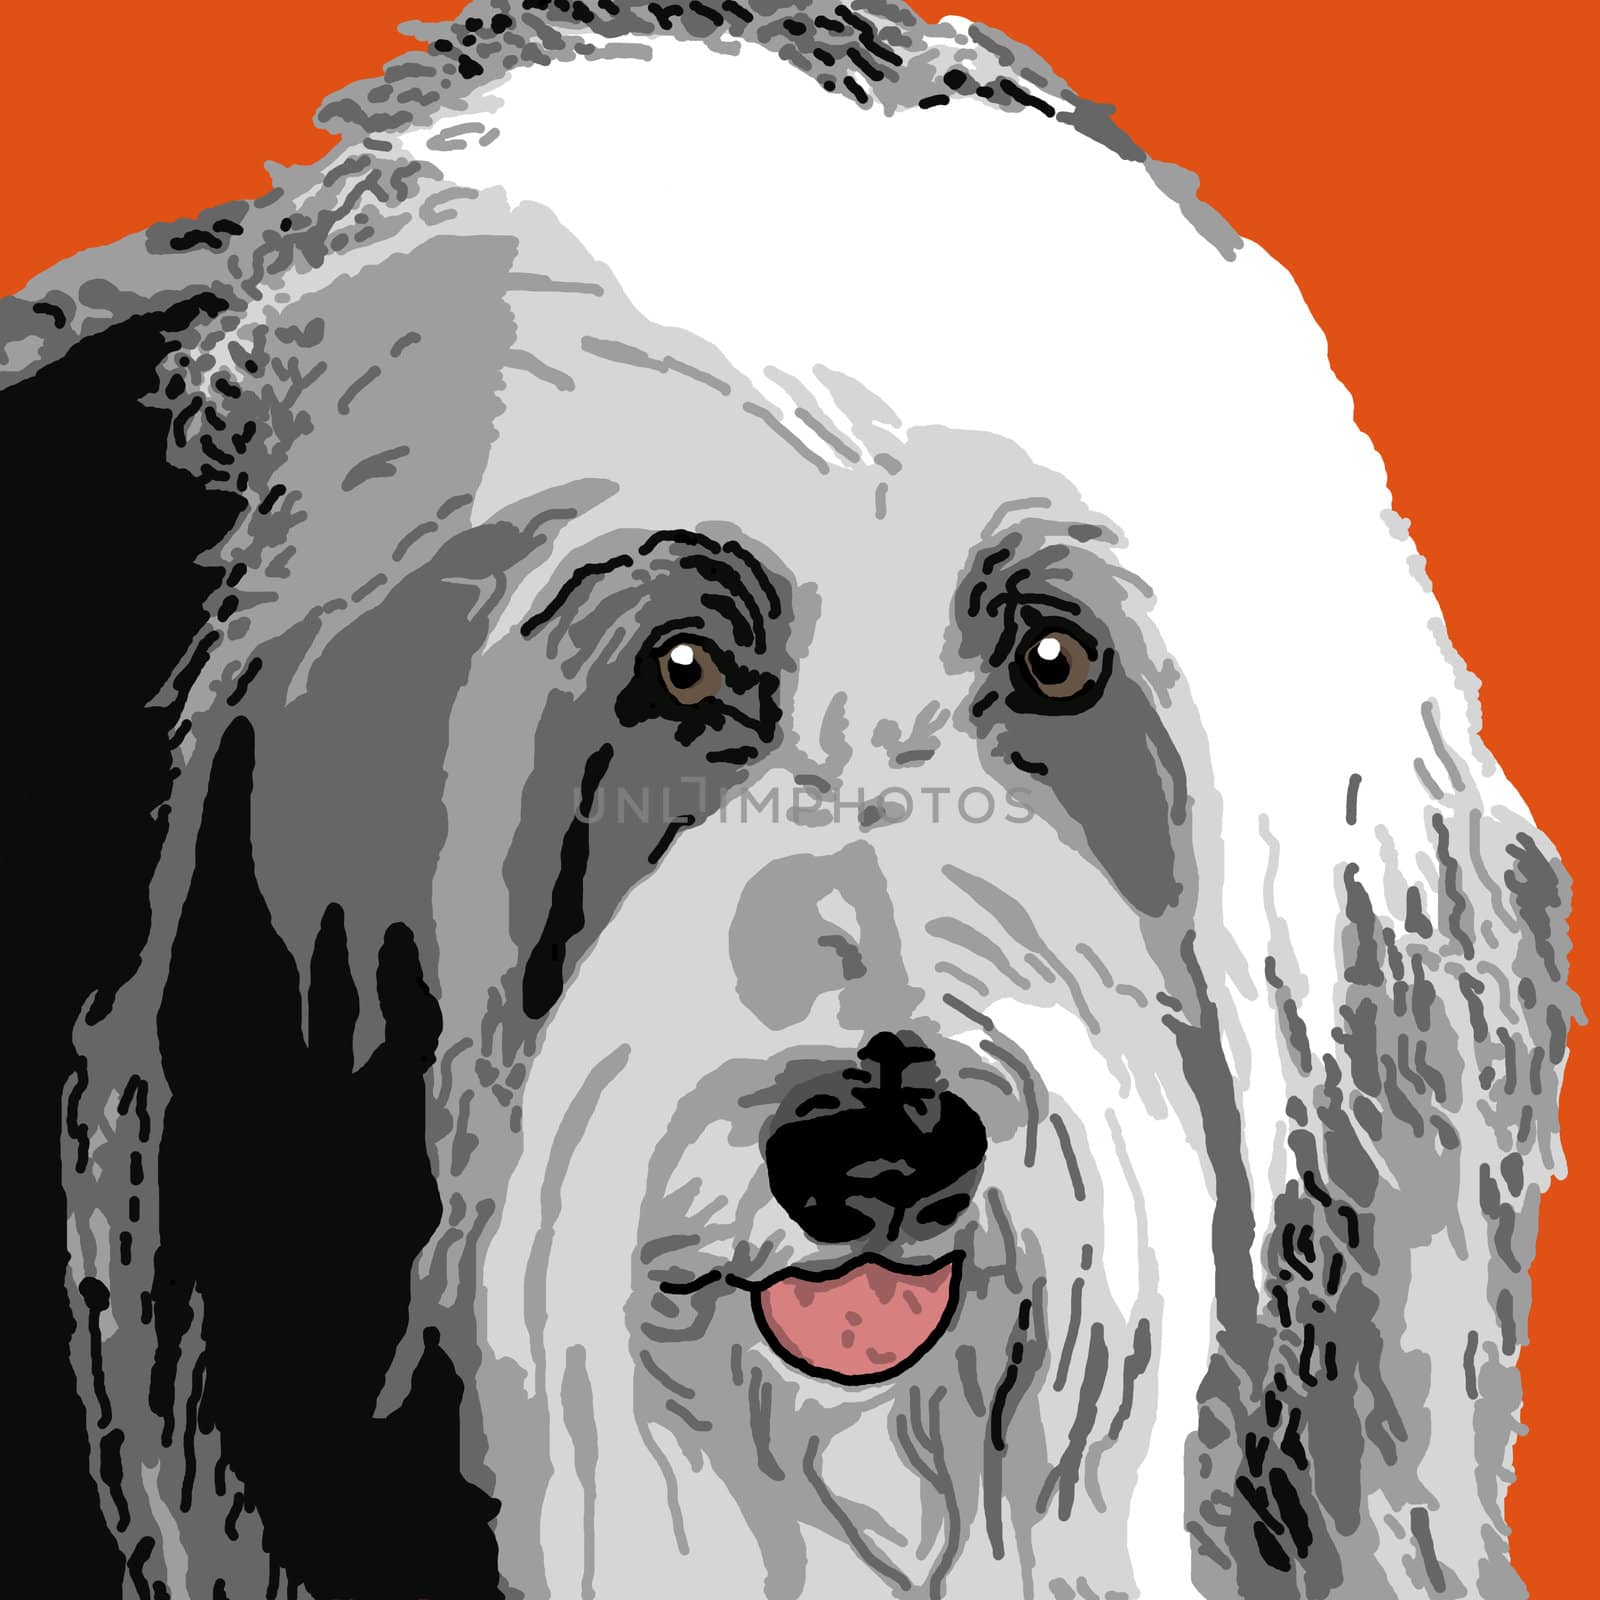 A portrait of an adult sheepdog on an orange background.